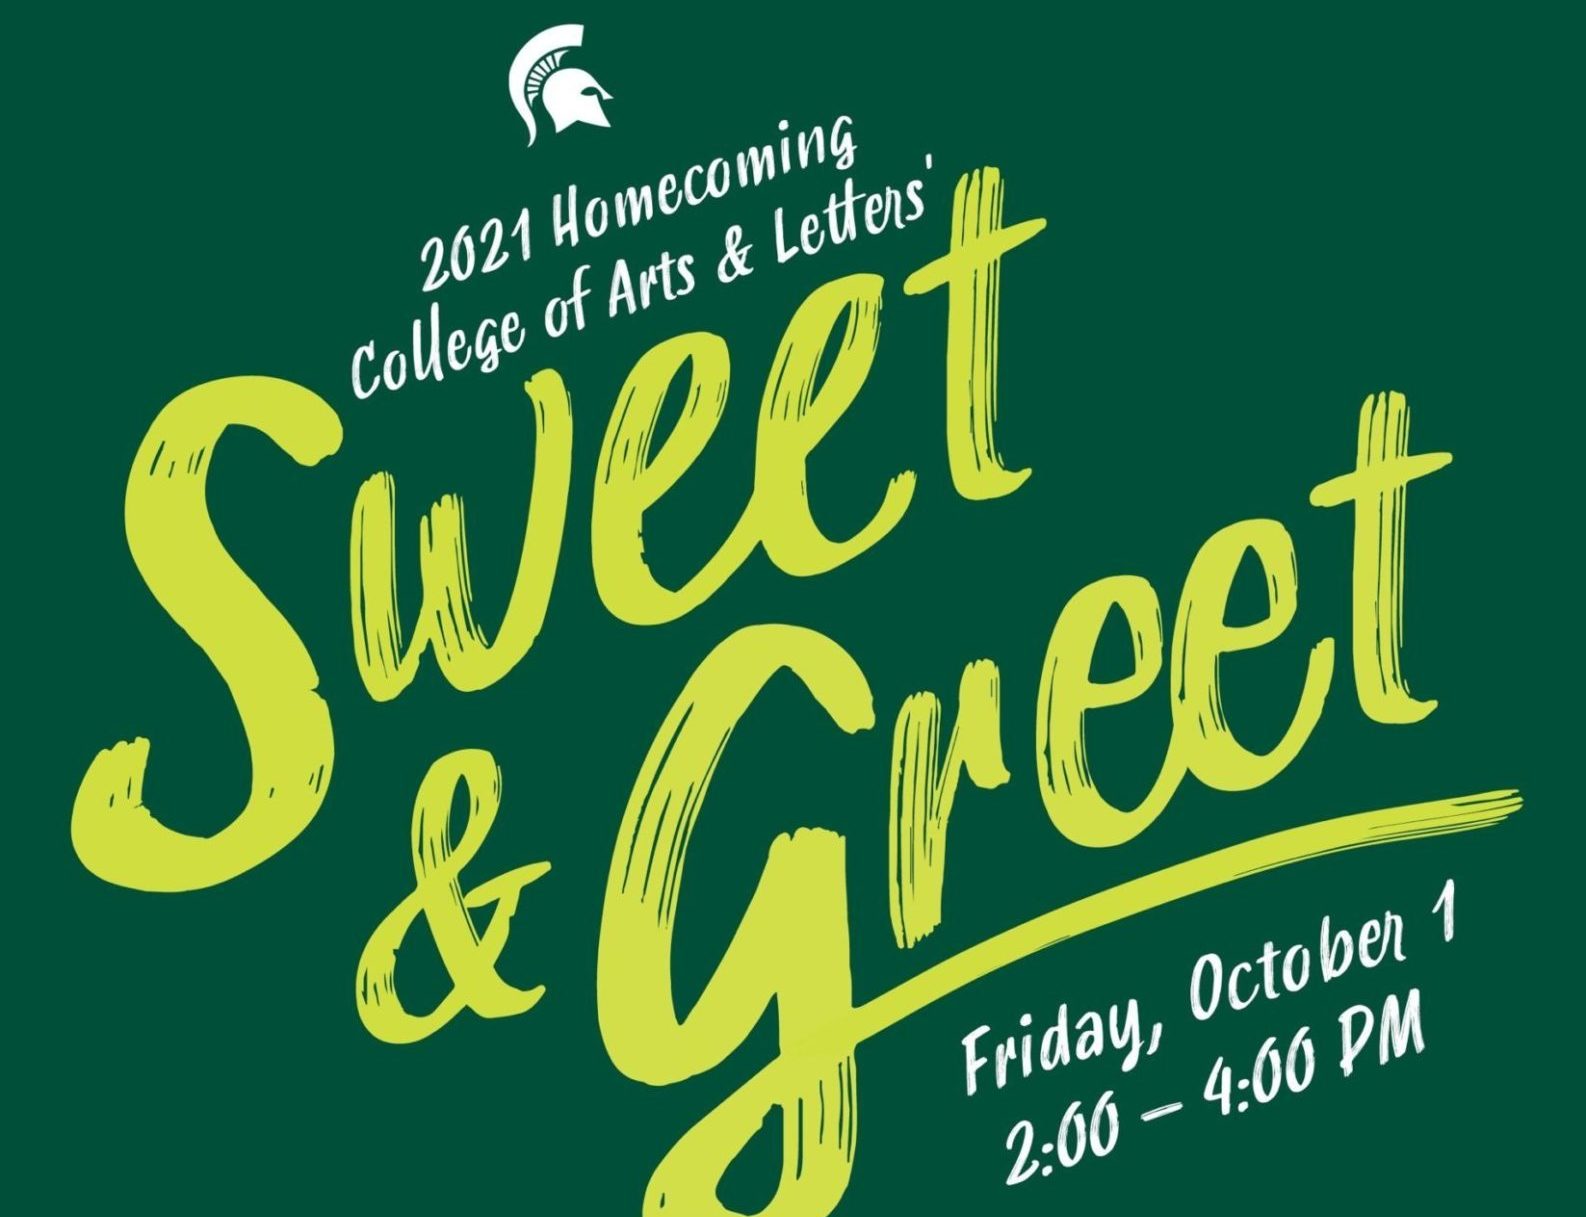 2021 Homecoming Event: Join us for Sweet & Greet